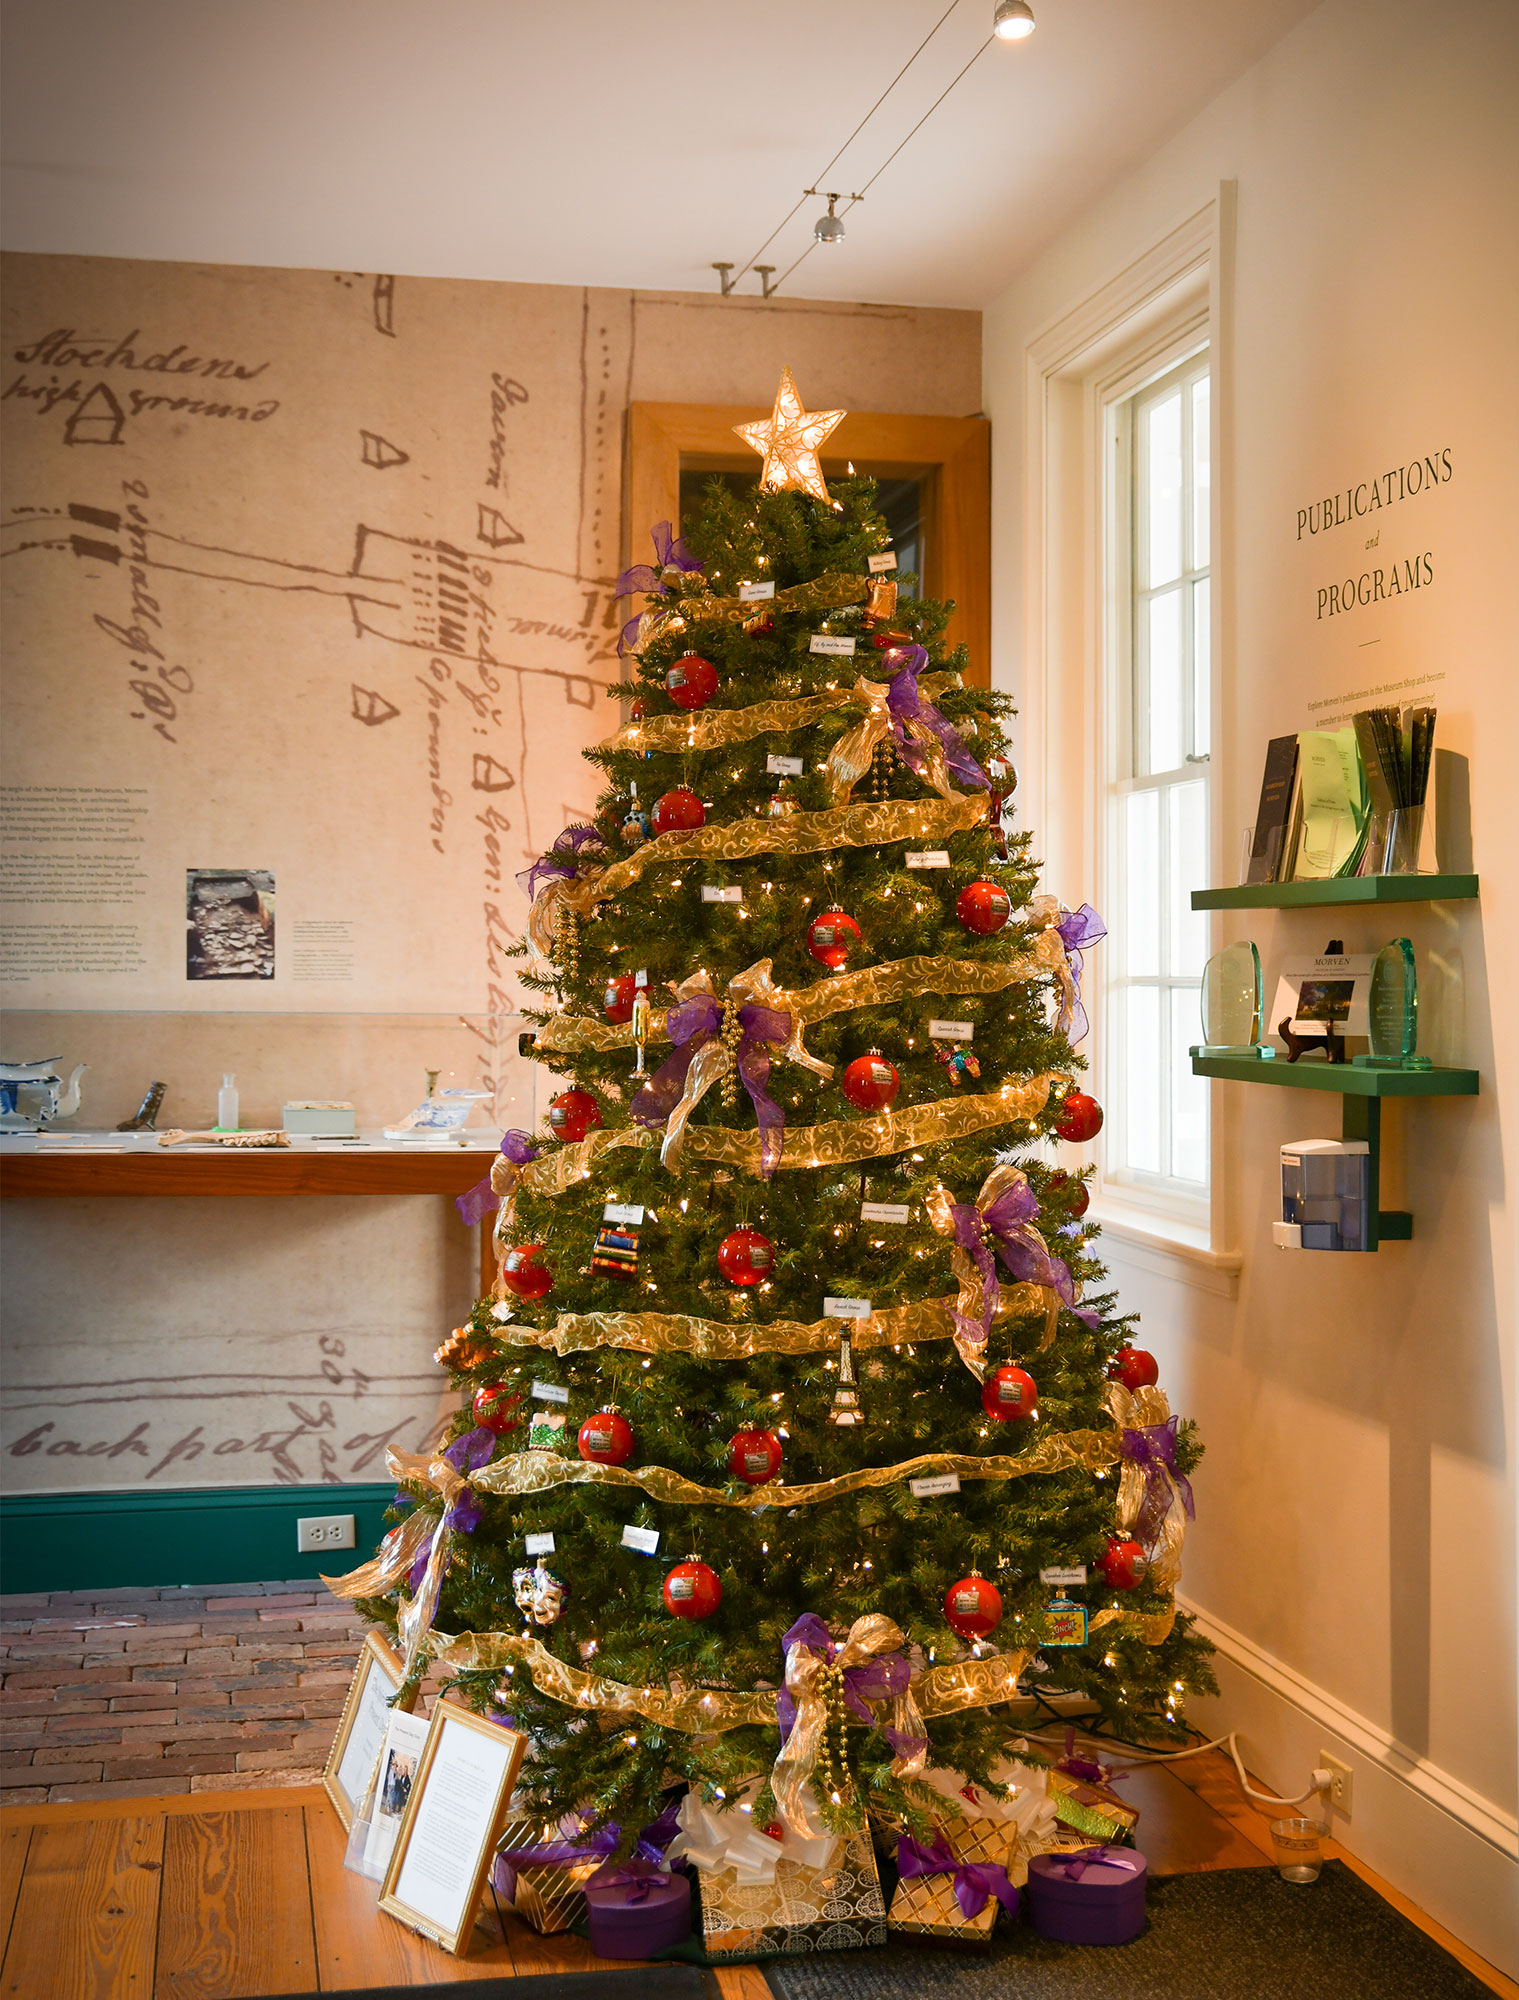 The “Spirit of the Present Day” Christmas tree stands at the rear entryway to Morven. A festive gold ribbon wraps around many colors of special and cheerful ornaments and bows. Museum displays can be seen  to the right and to the left.